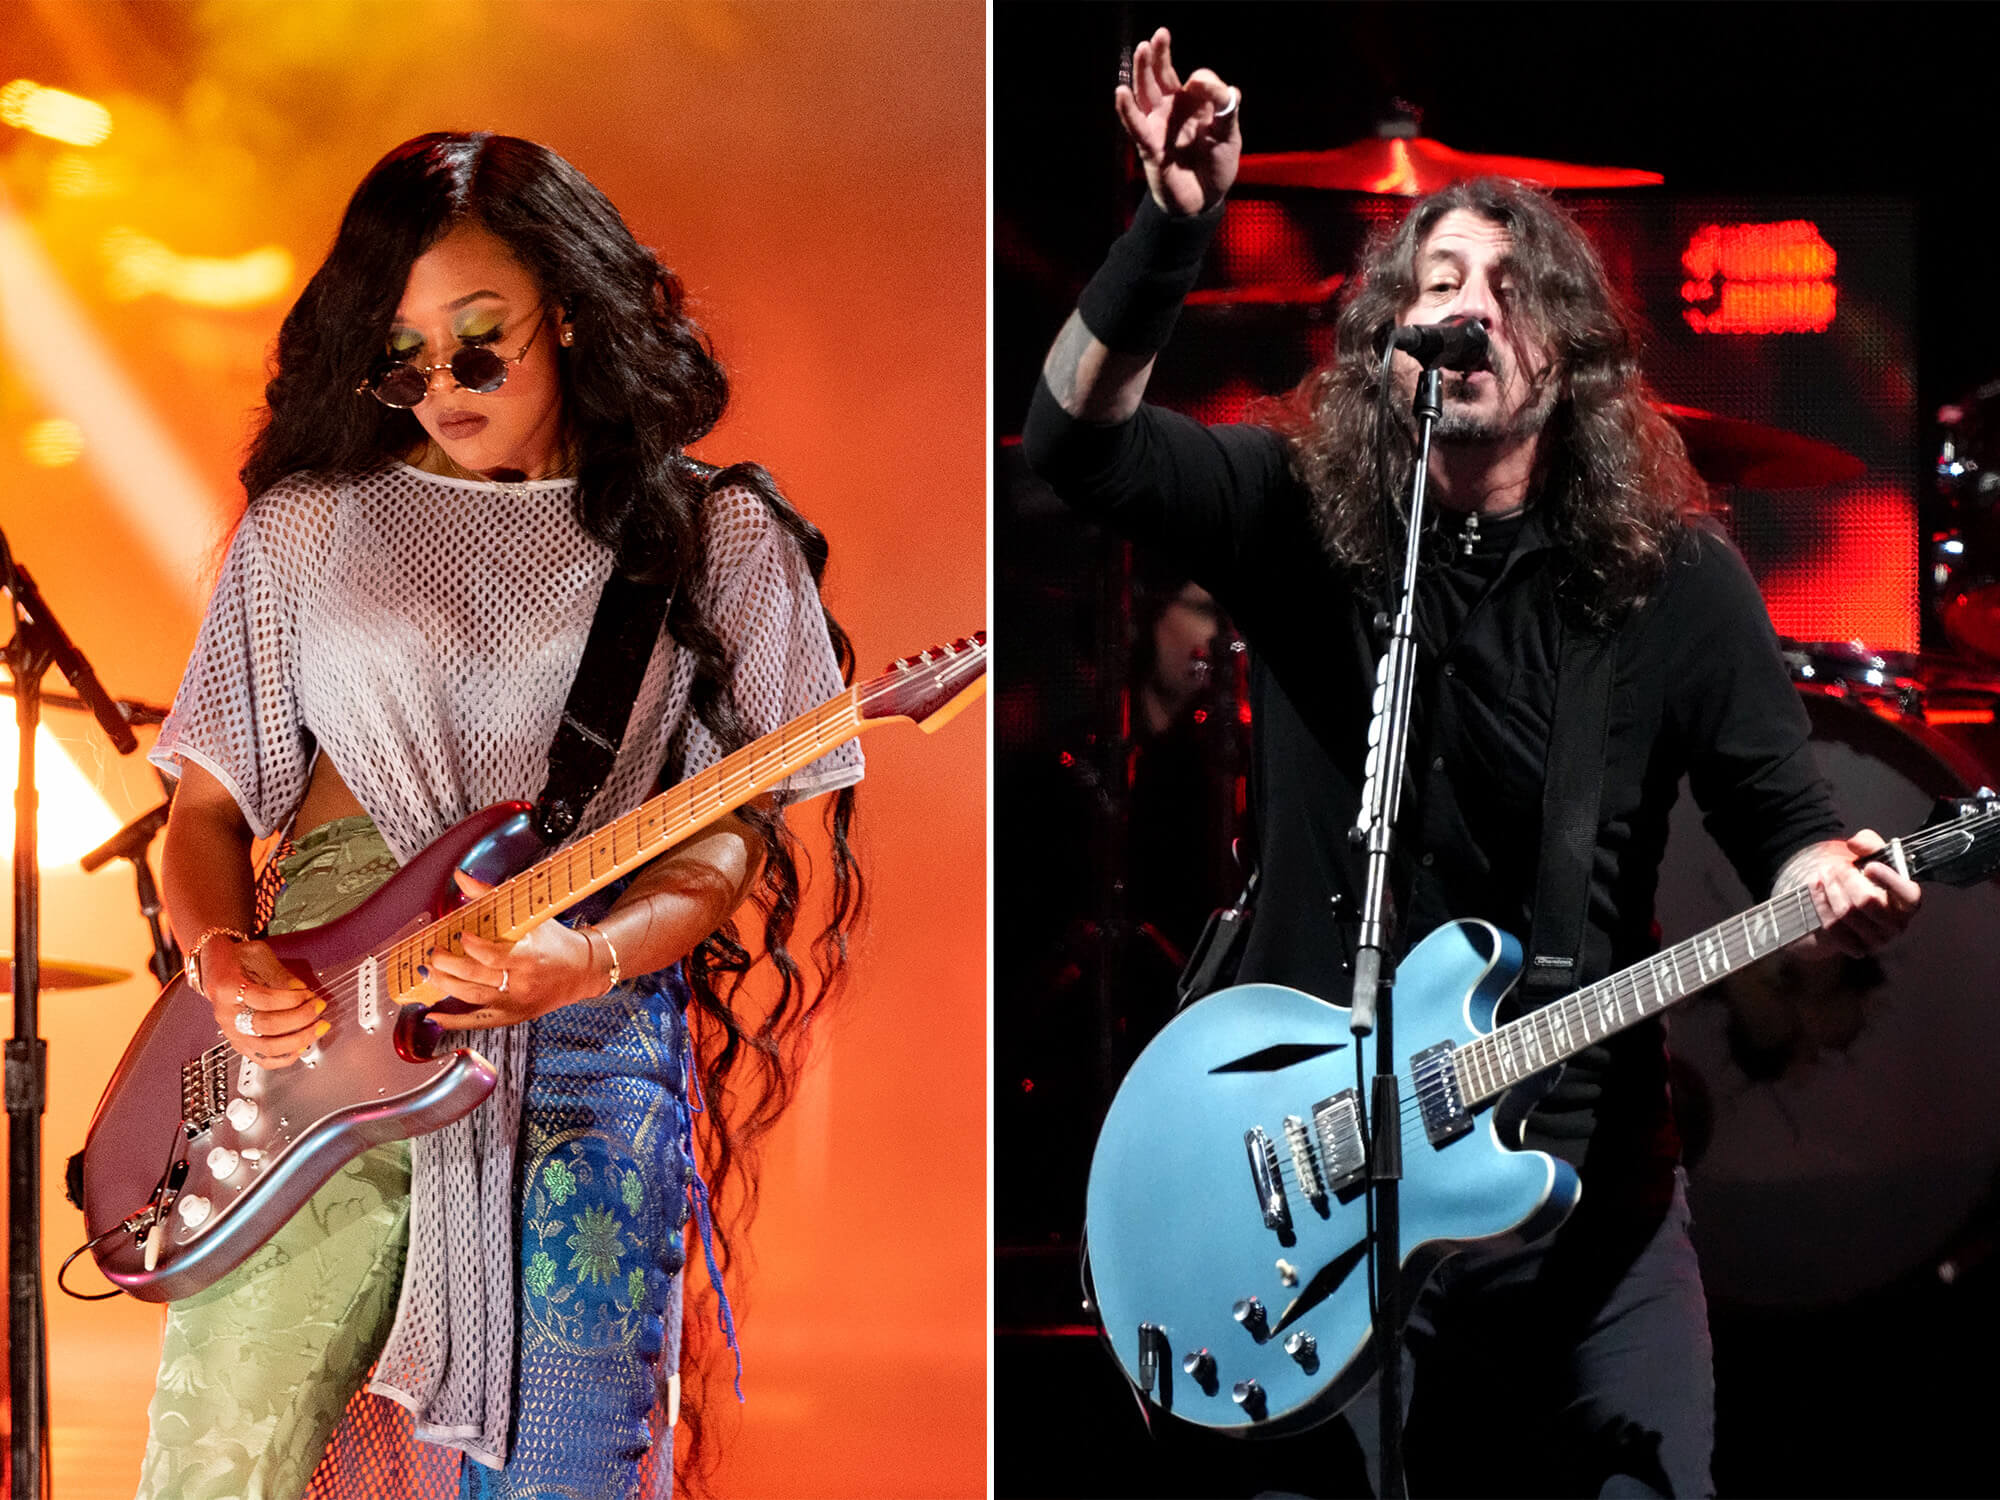 H.E.R (left) and Dave Growl (right) both on stage playing guitar